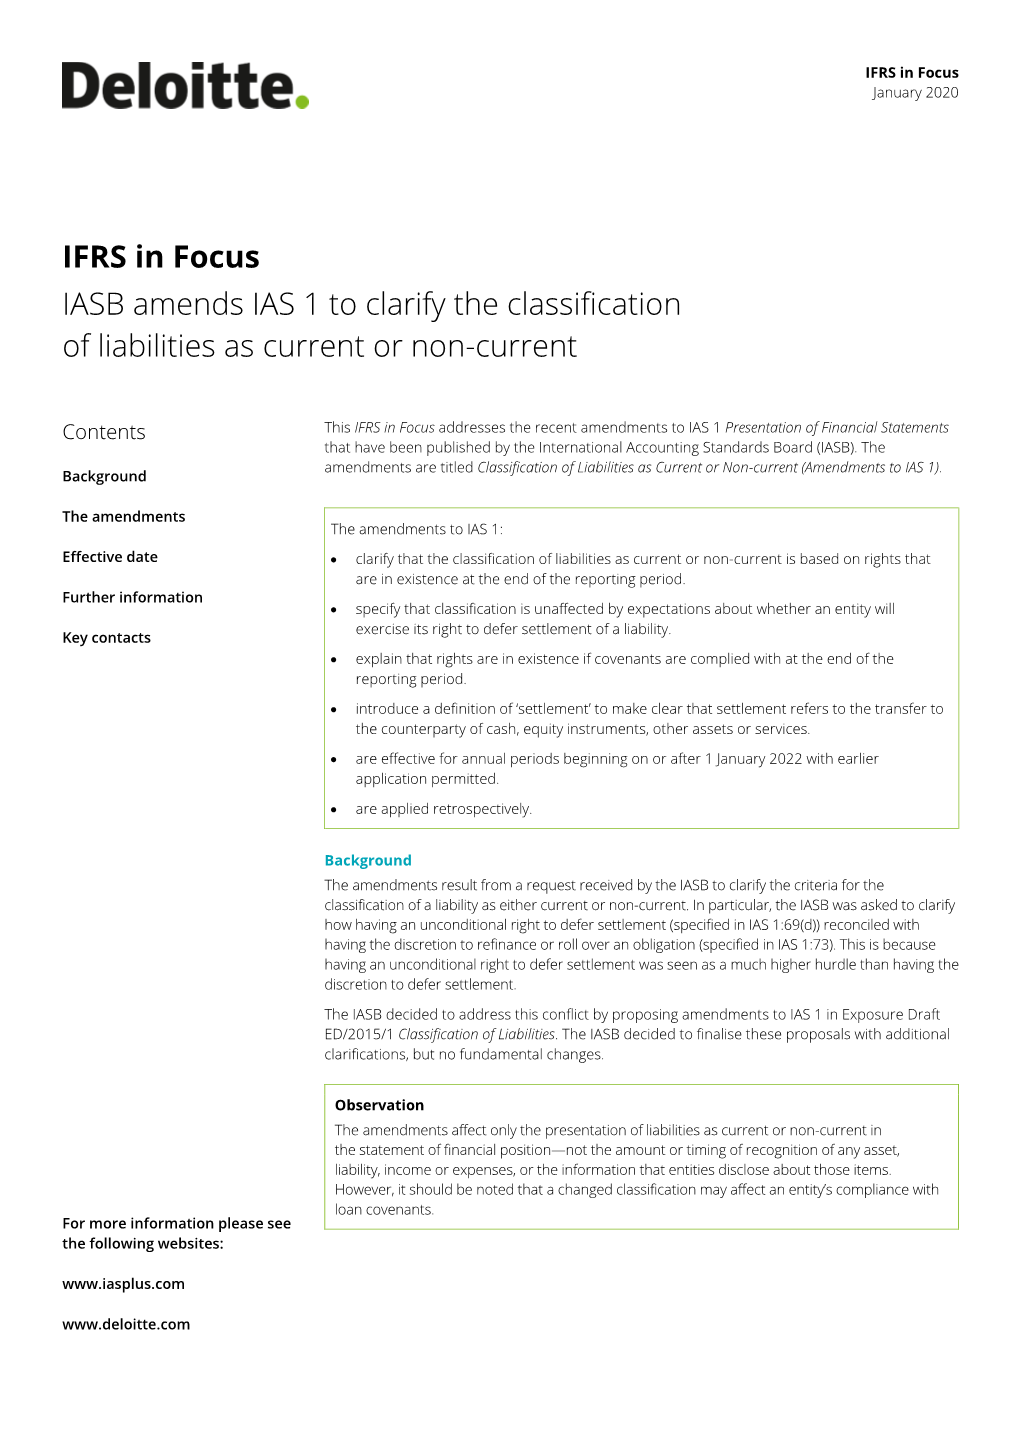 IFRS in Focus IASB Amends IAS 1 to Clarify the Classification of Liabilities As Current Or Non-Current